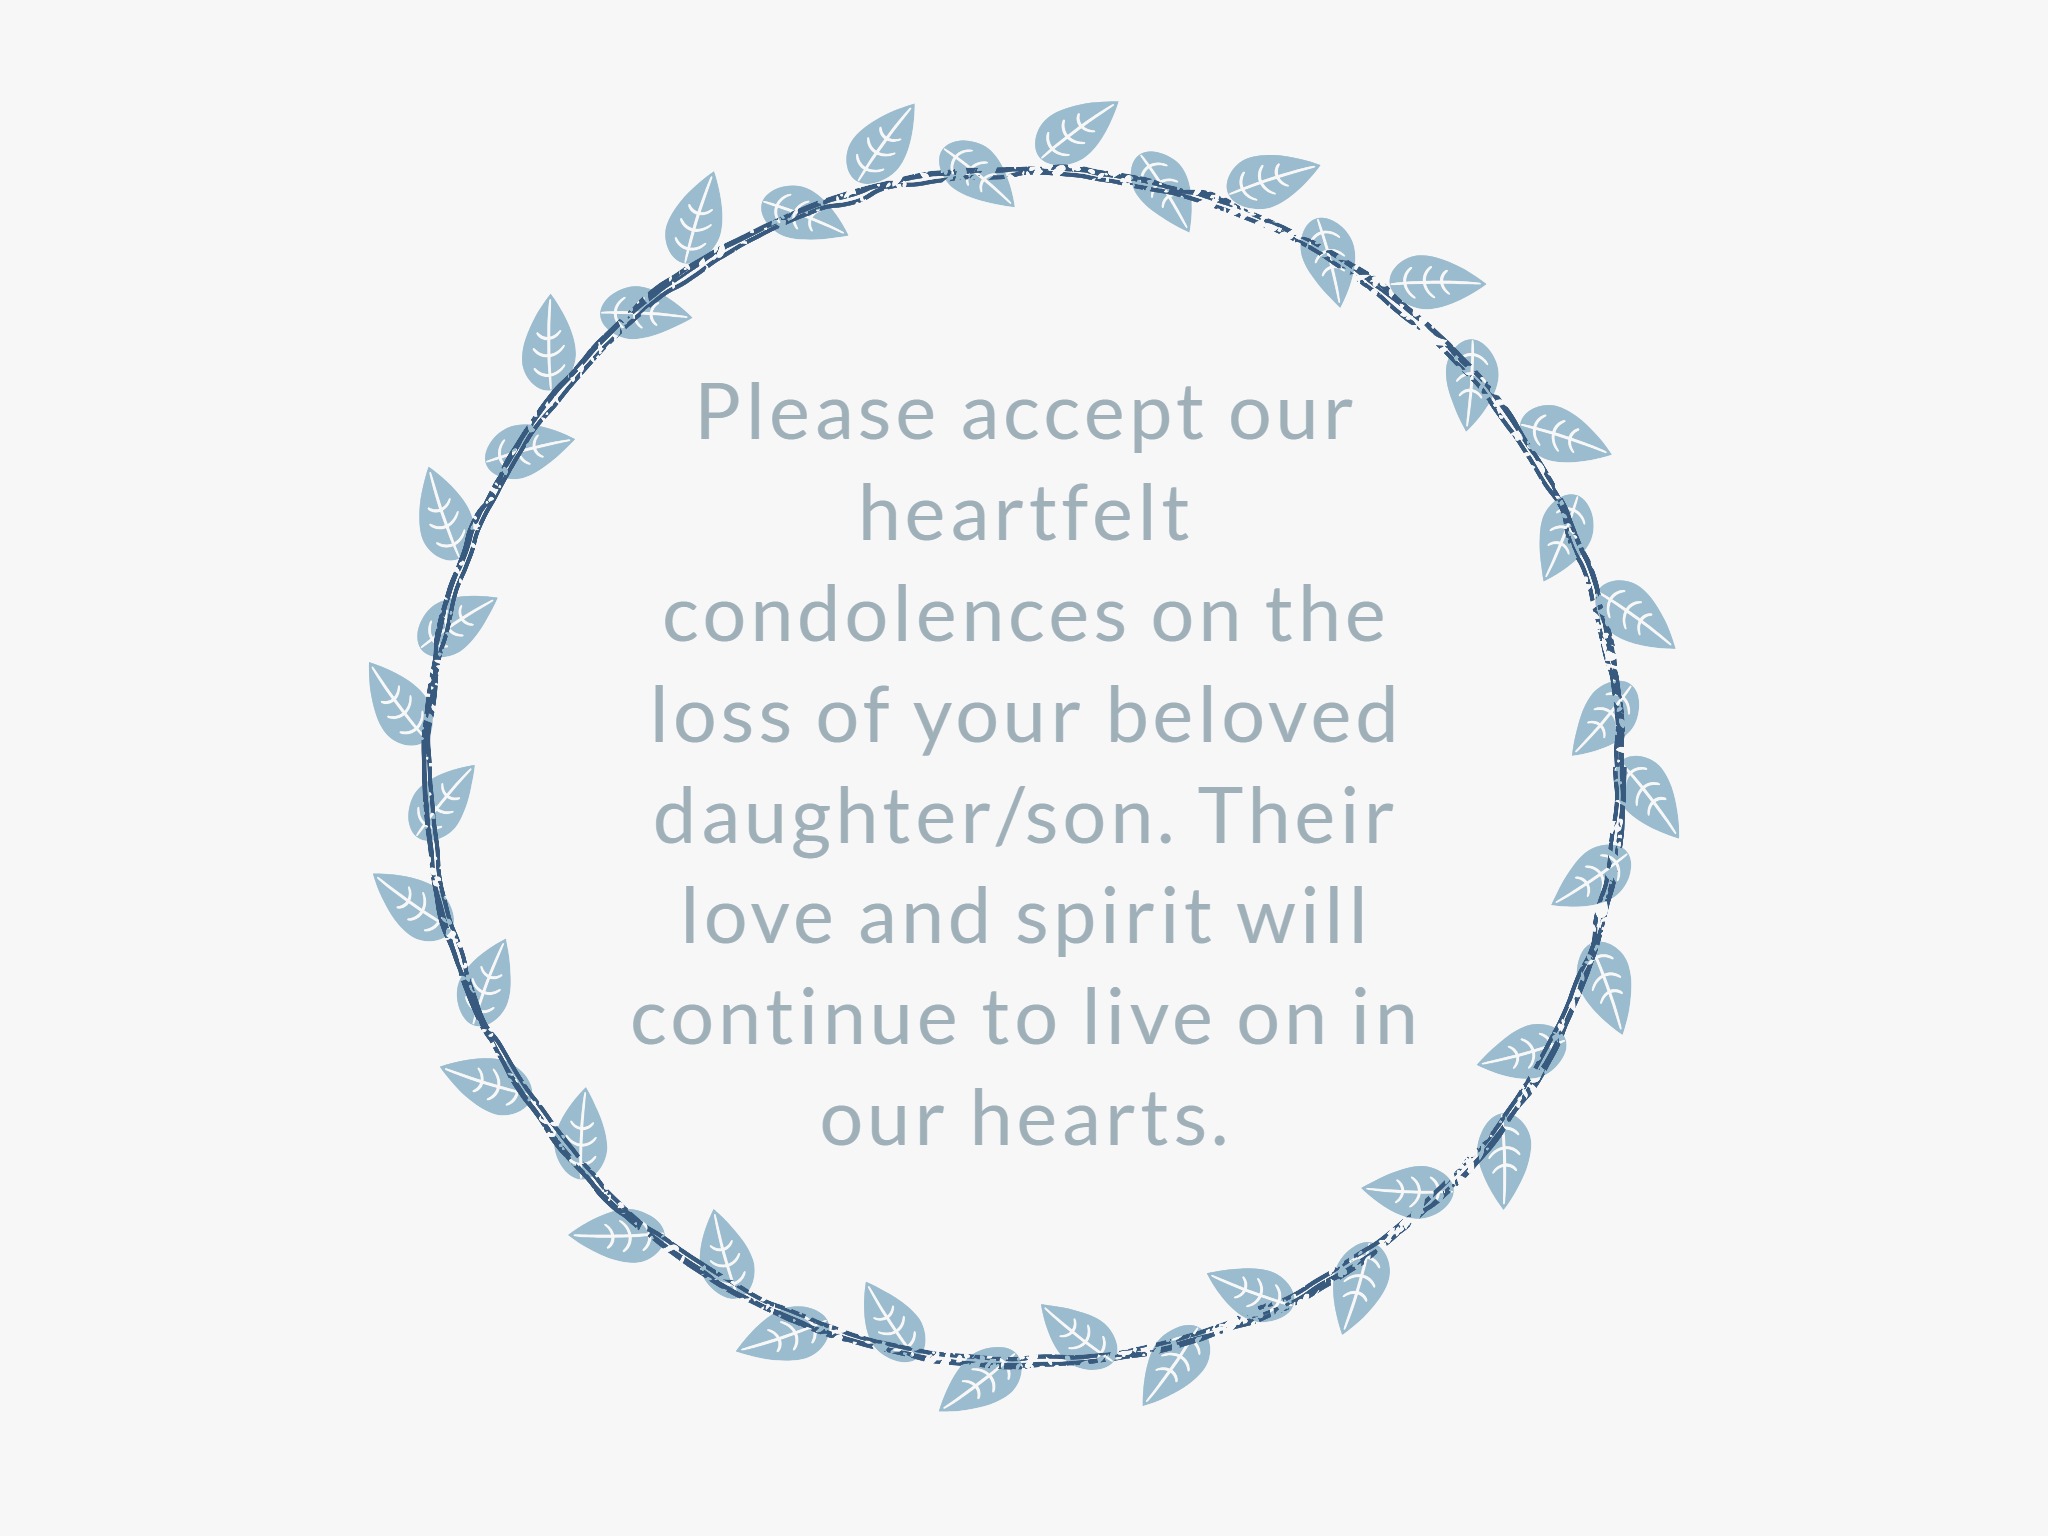 florid styled sympathy card with condolence message